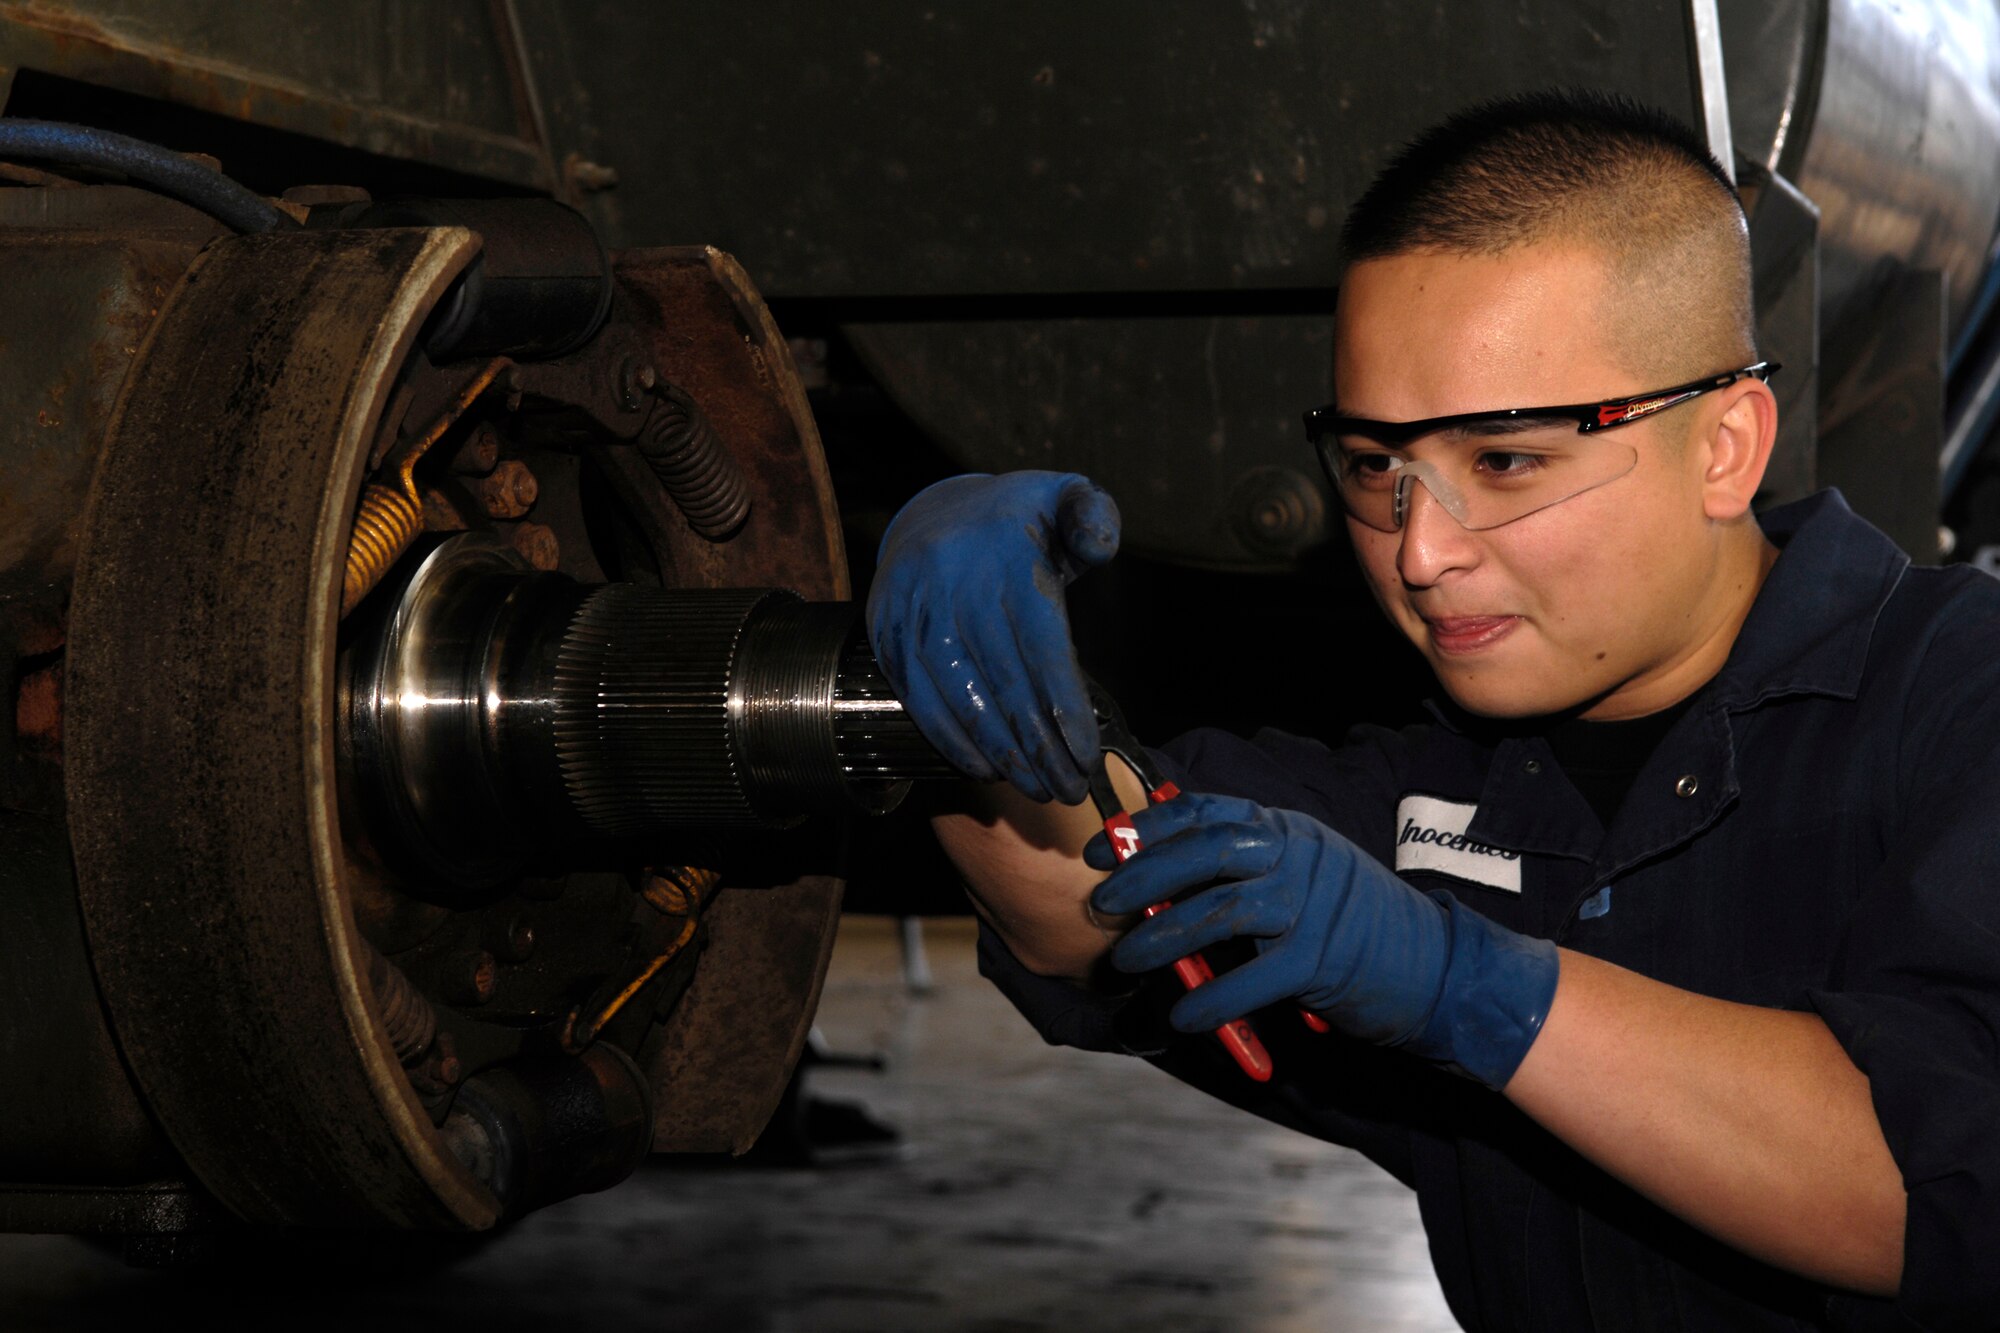 VANDENBERG AIR FORCE BASE, Calif. -- Senior Airman Dennis Inocentes, an auto mechanic with the 30th Logistics Readiness Squadron, performs routine maintenance on a vehicle on Dec. 6. 30th LRS combines planning, supply and transportation skills into one organization with all resources to keep pace with the swift demands of deployment. (U.S. Air Force photo/Airman 1st Class Christian Thomas)